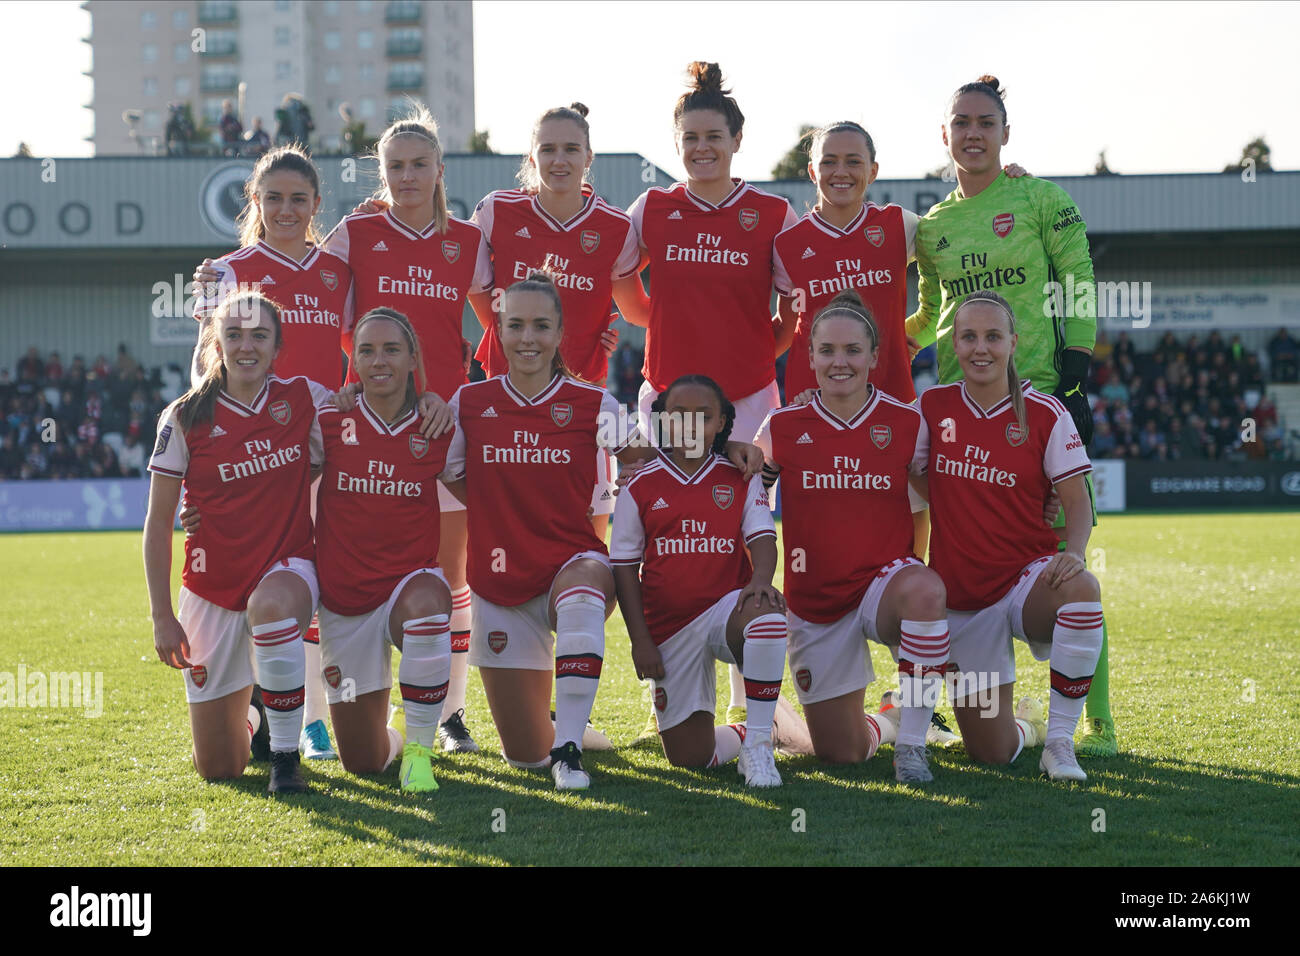 Borehamwood, UK. 27th Oct, 2019. Starting XI of Arsenal during the Barclay's FA WSL football match between Arsenal vs Manchester City at Meadow Park on October 27, 2019 in Borehamwood, England (Photo by Daniela Porcelli/SPP) Credit: SPP Sport Press Photo. /Alamy Live News Stock Photo